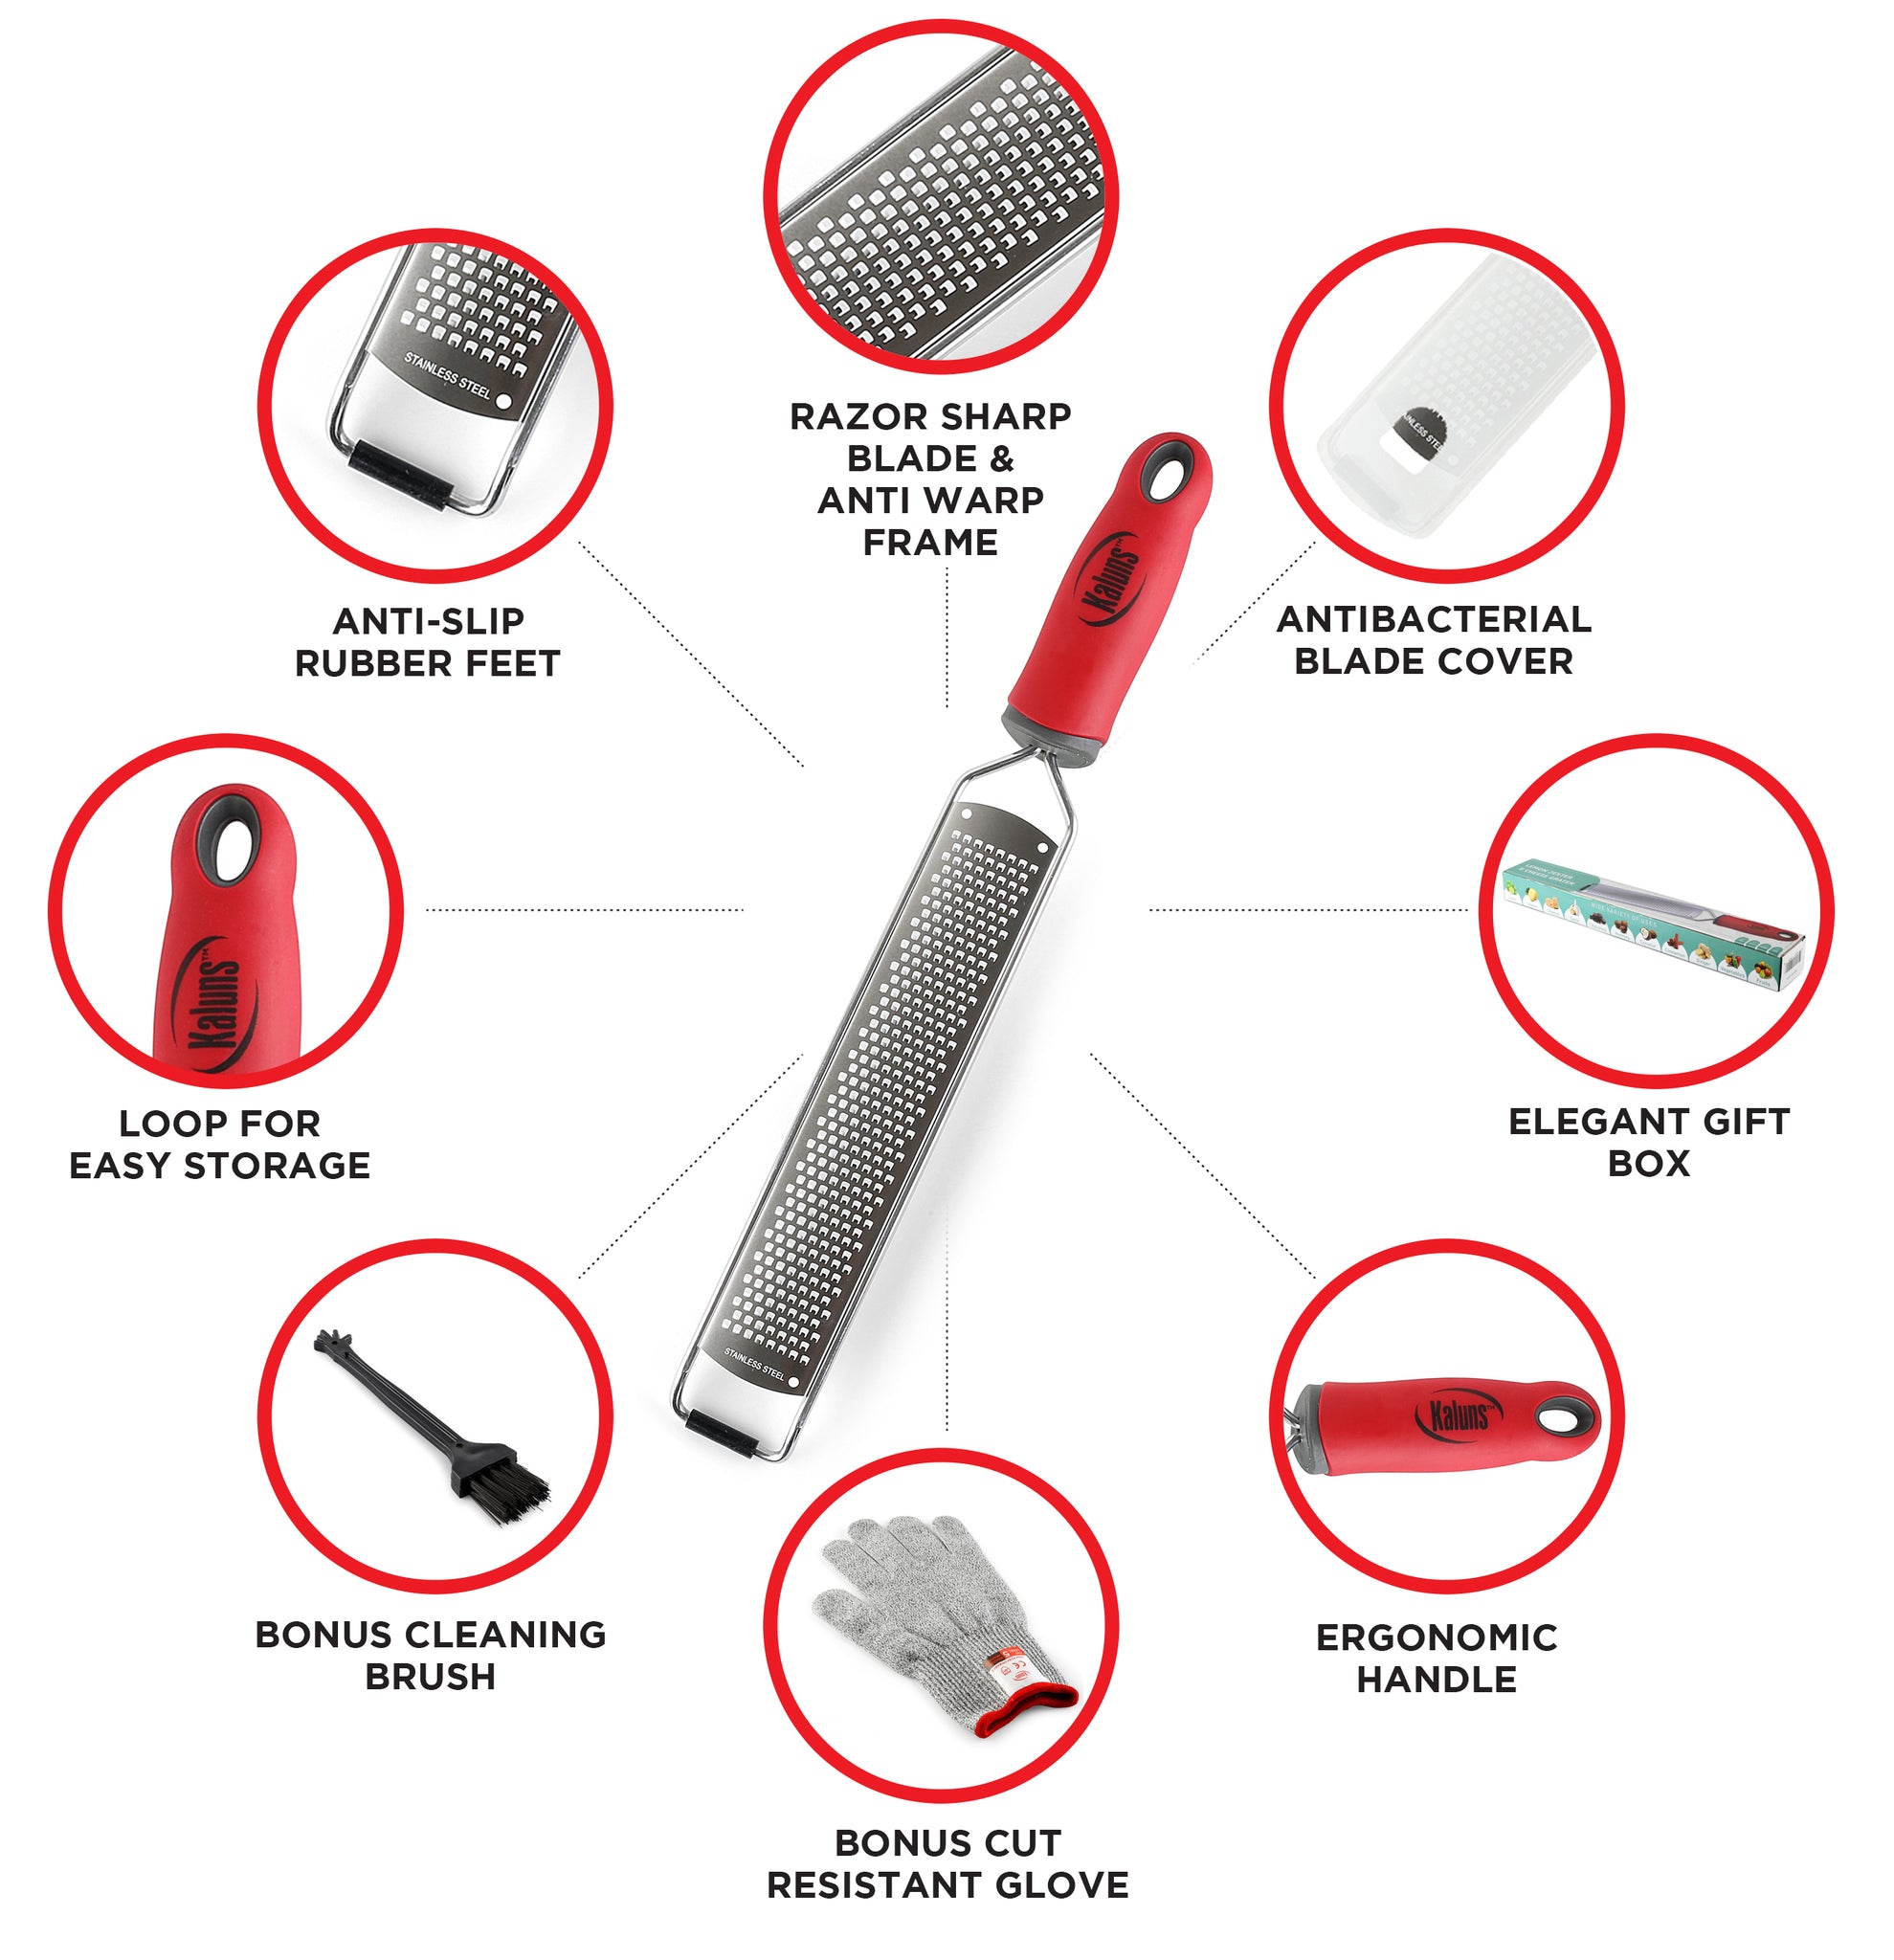 Cheese Grater & Lemon Zester With Protect Cover Cleaning Brush